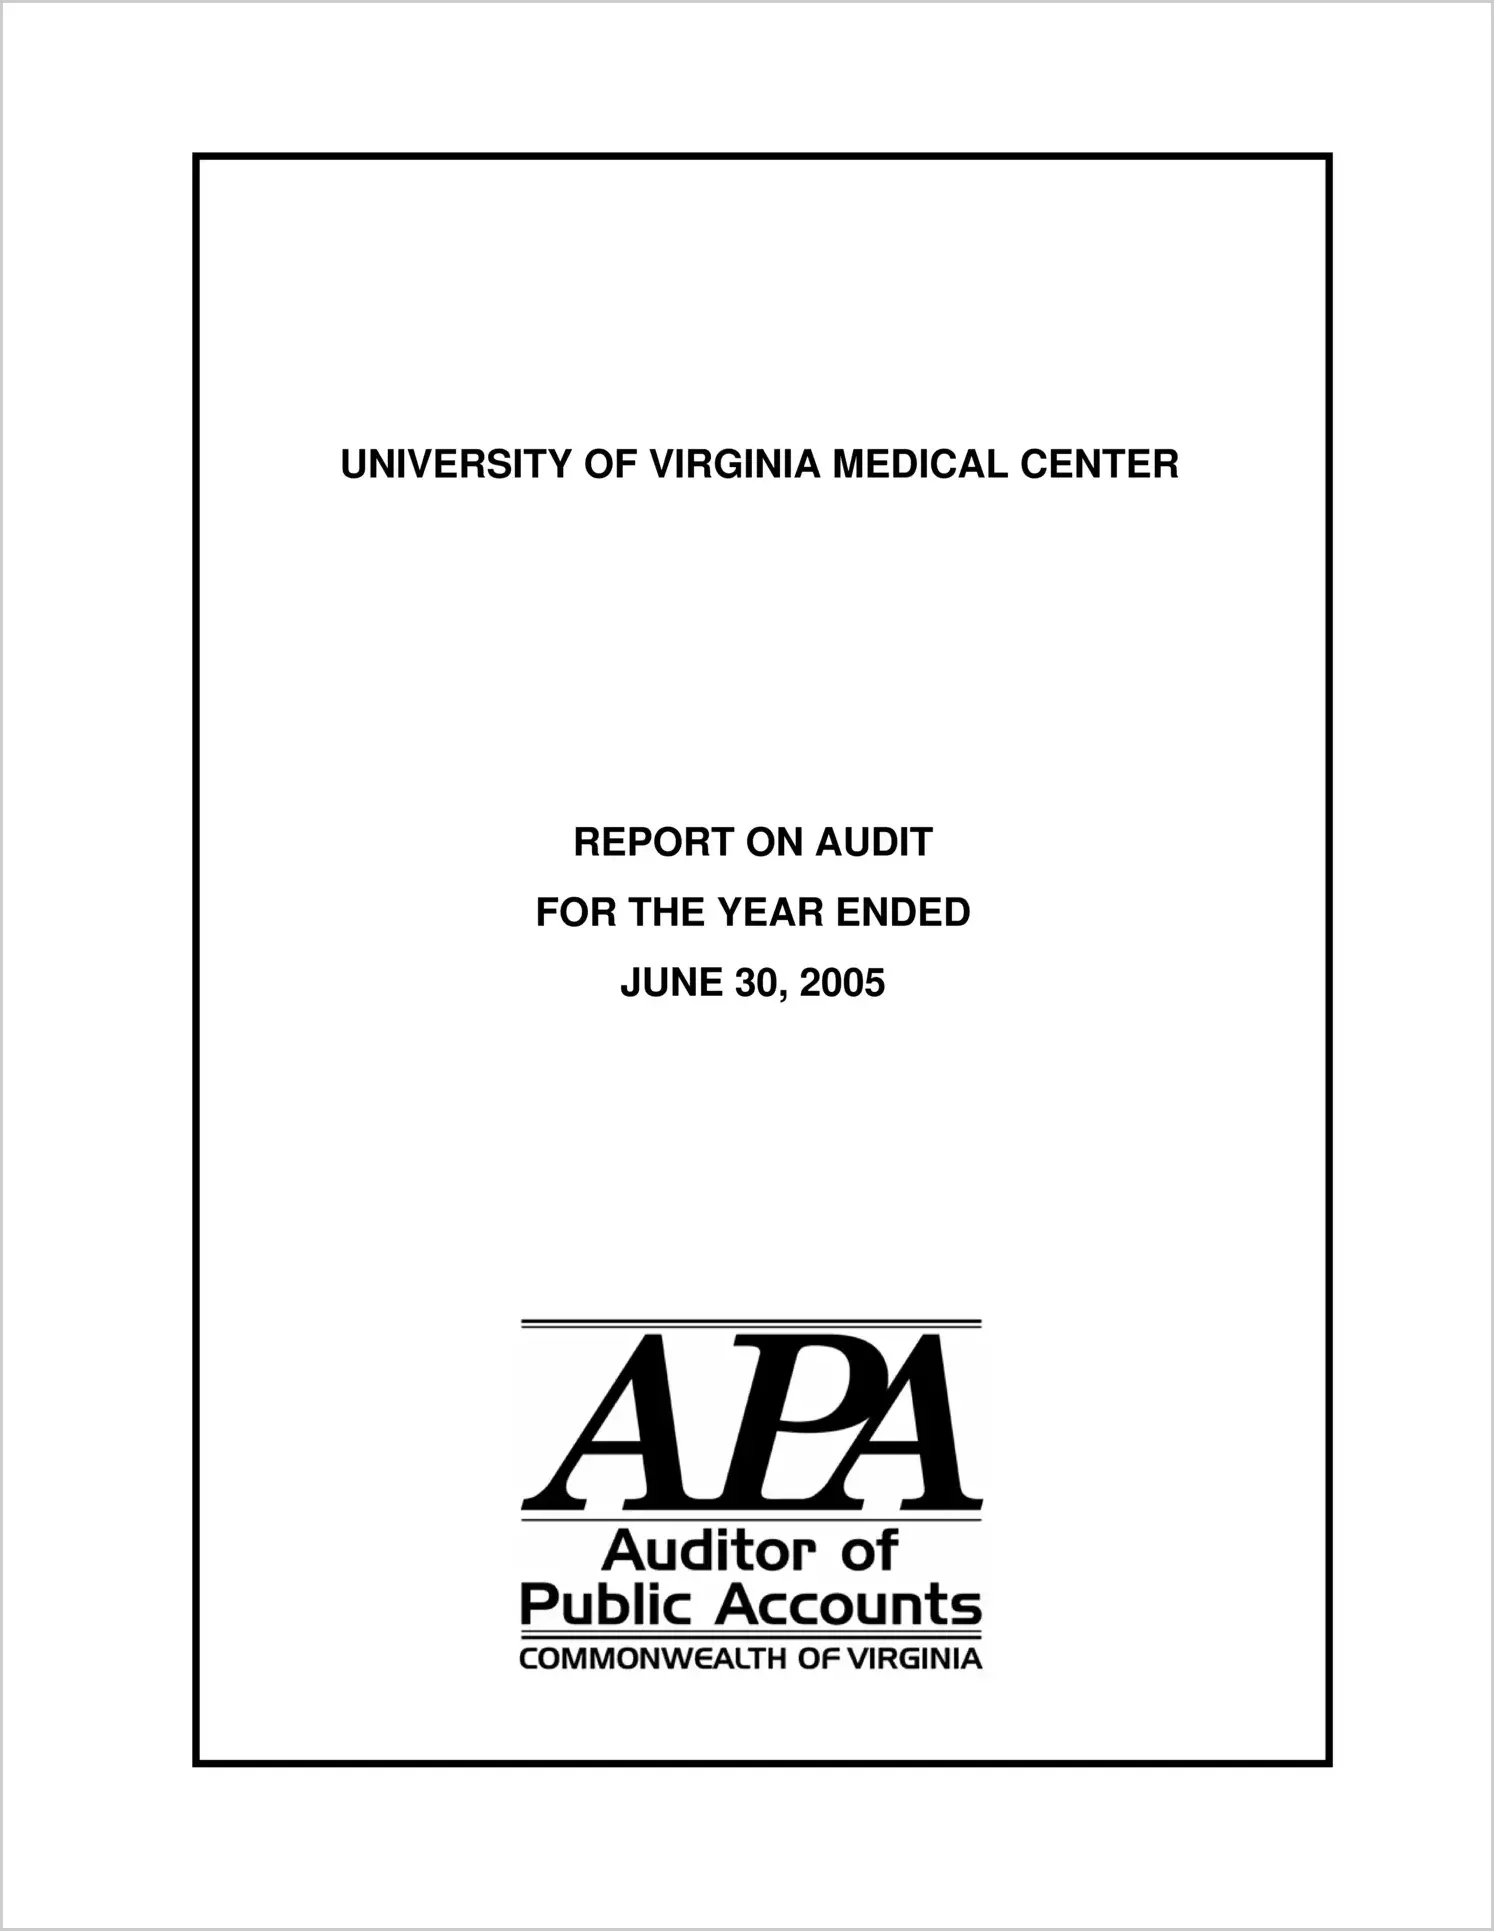 University of Virginia Medical Center for the year ended June 30, 2005